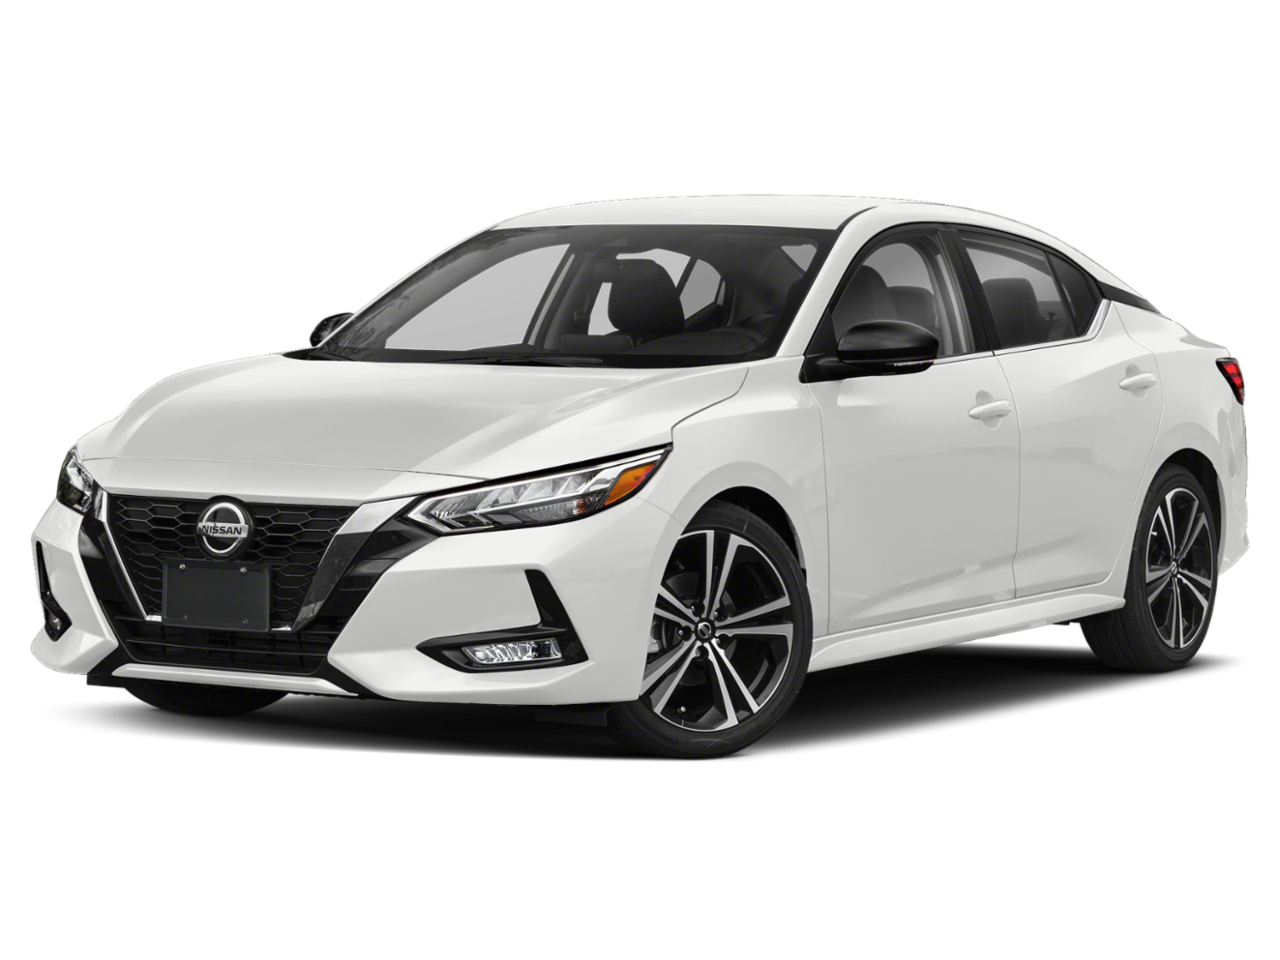 Search New Nissan Sentra Vehicles for Sale Online Near Oakland